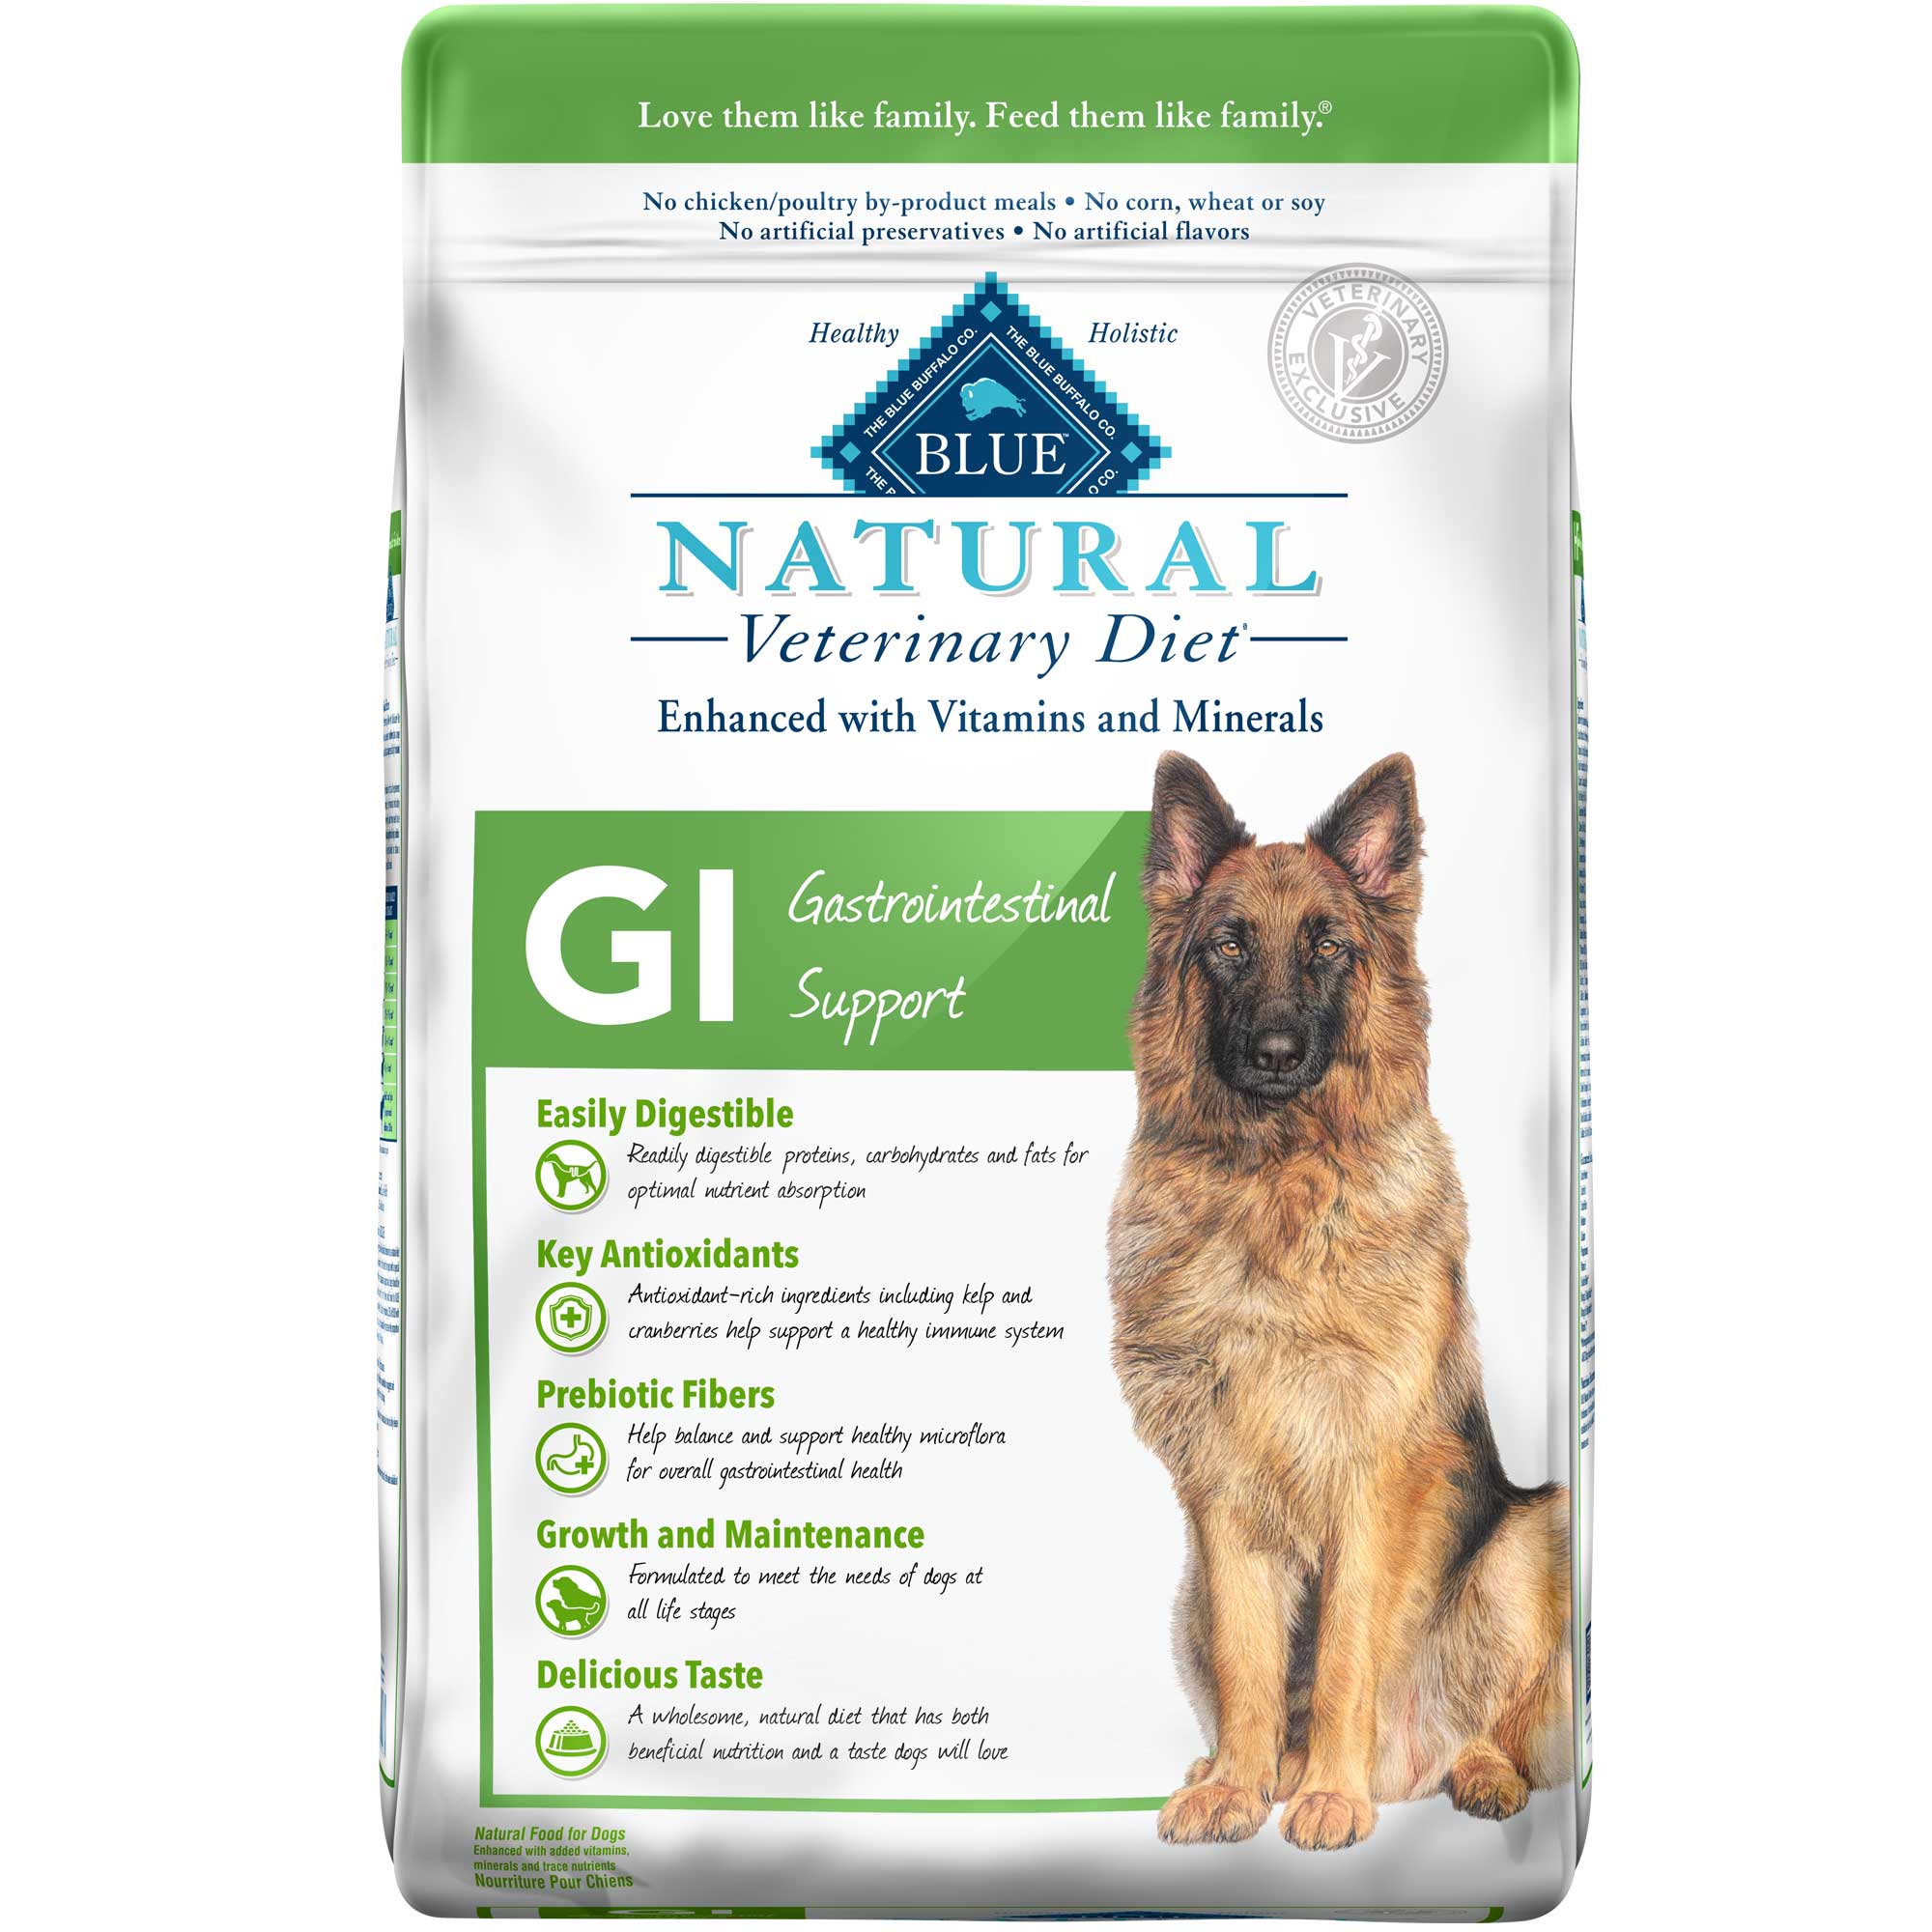 BLUE Natural Veterinary Diet GI Gastrointestinal Support Dry Dog Food Usage